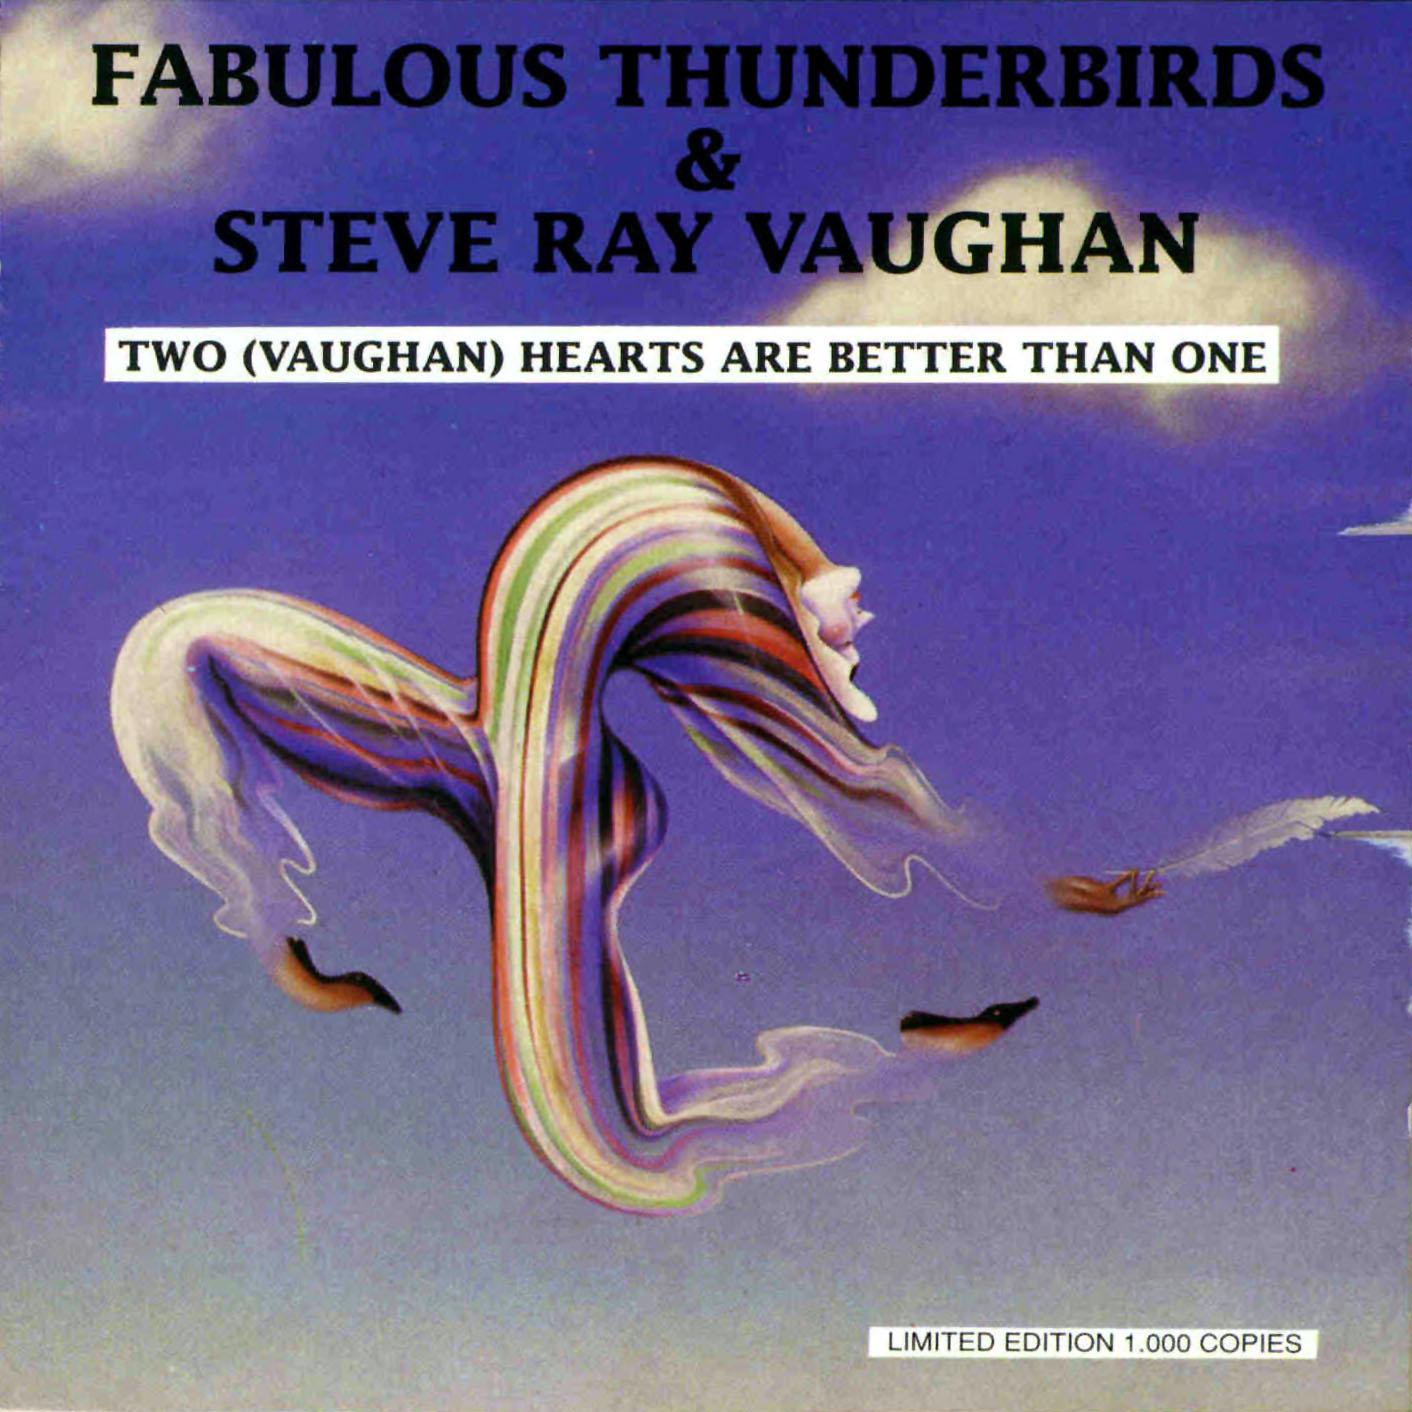 [The+Fabulous+Thunderbirds+&+Steve+Ray+Vaughan+-+Two+(Vaughan)+Hearts+are+better+than+One+-+Front.jpg]